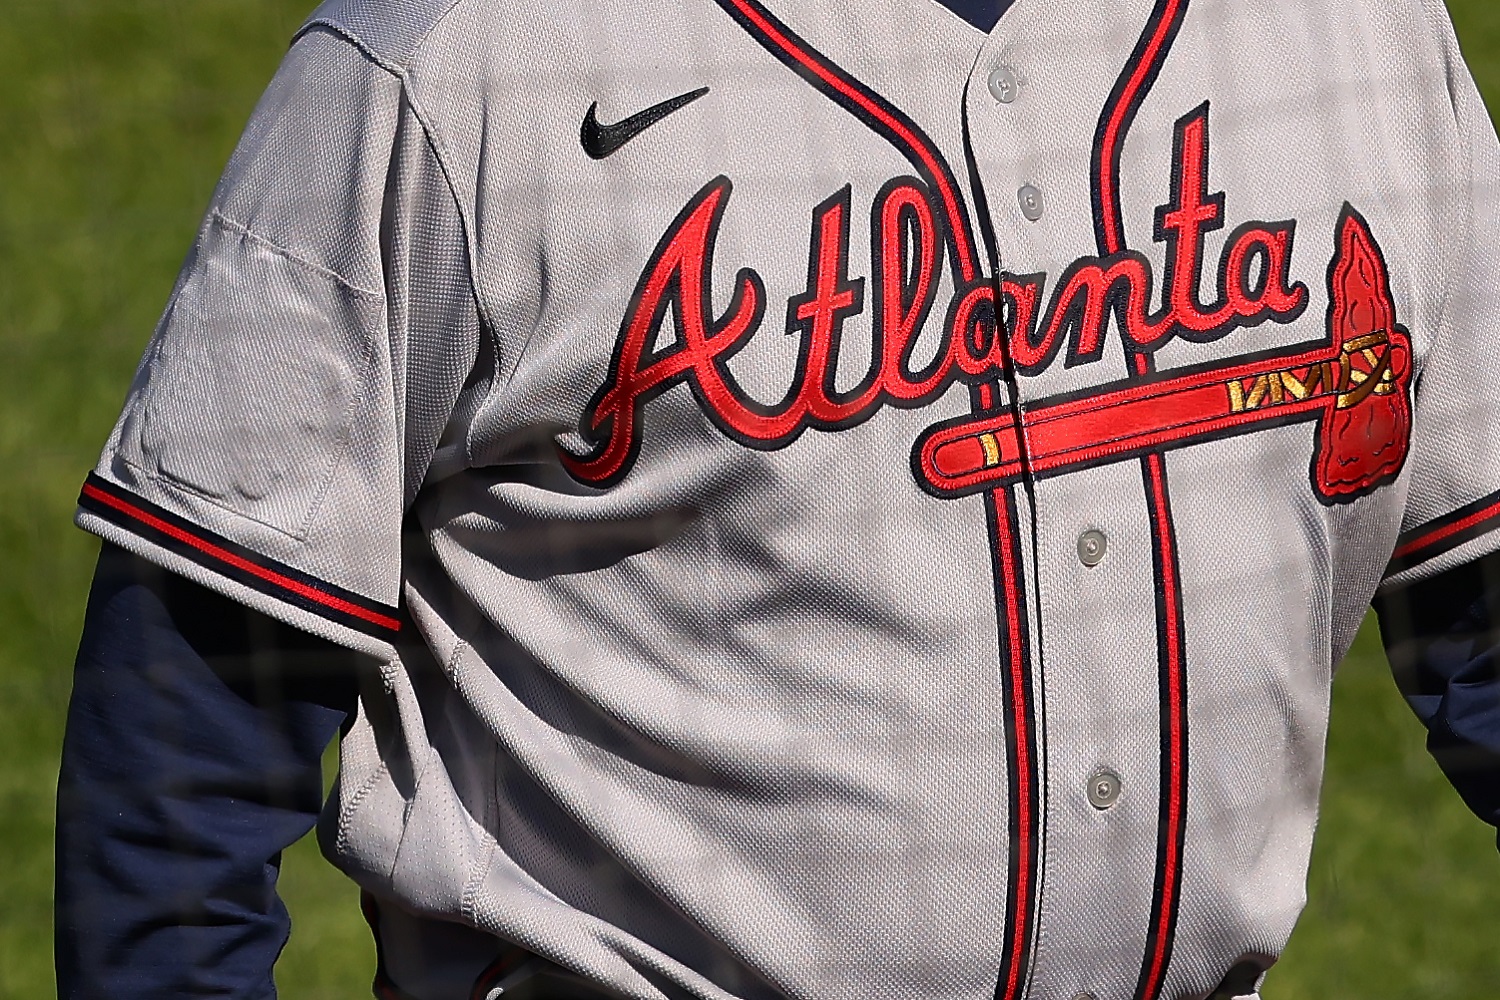 The All-Star Game logo is covered up on the right sleeve of manager Brian Snitker of the Atlanta Braves during a baseball game against the Philadelphia Phillies at Citizens Bank Park on April 4, 2021. | Rich Schultz/Getty Images